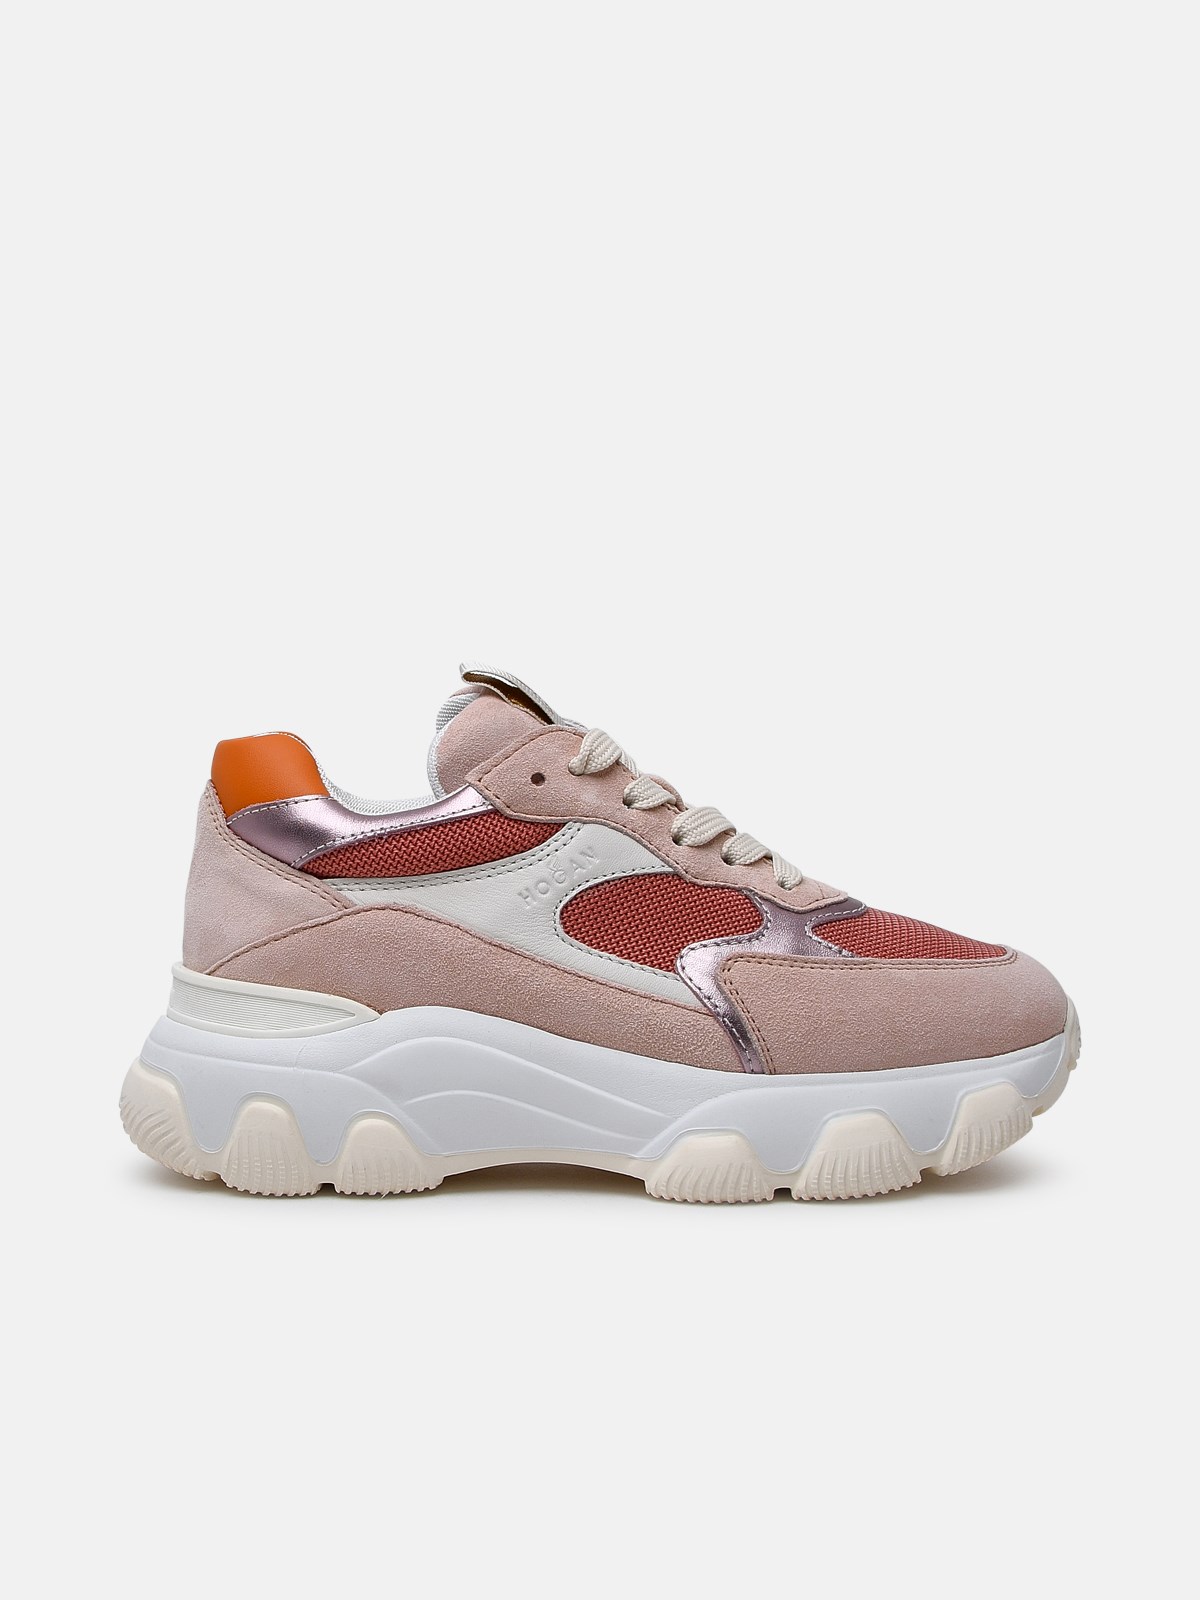 Hogan Hyperactive Pink Suede Blend Trainers